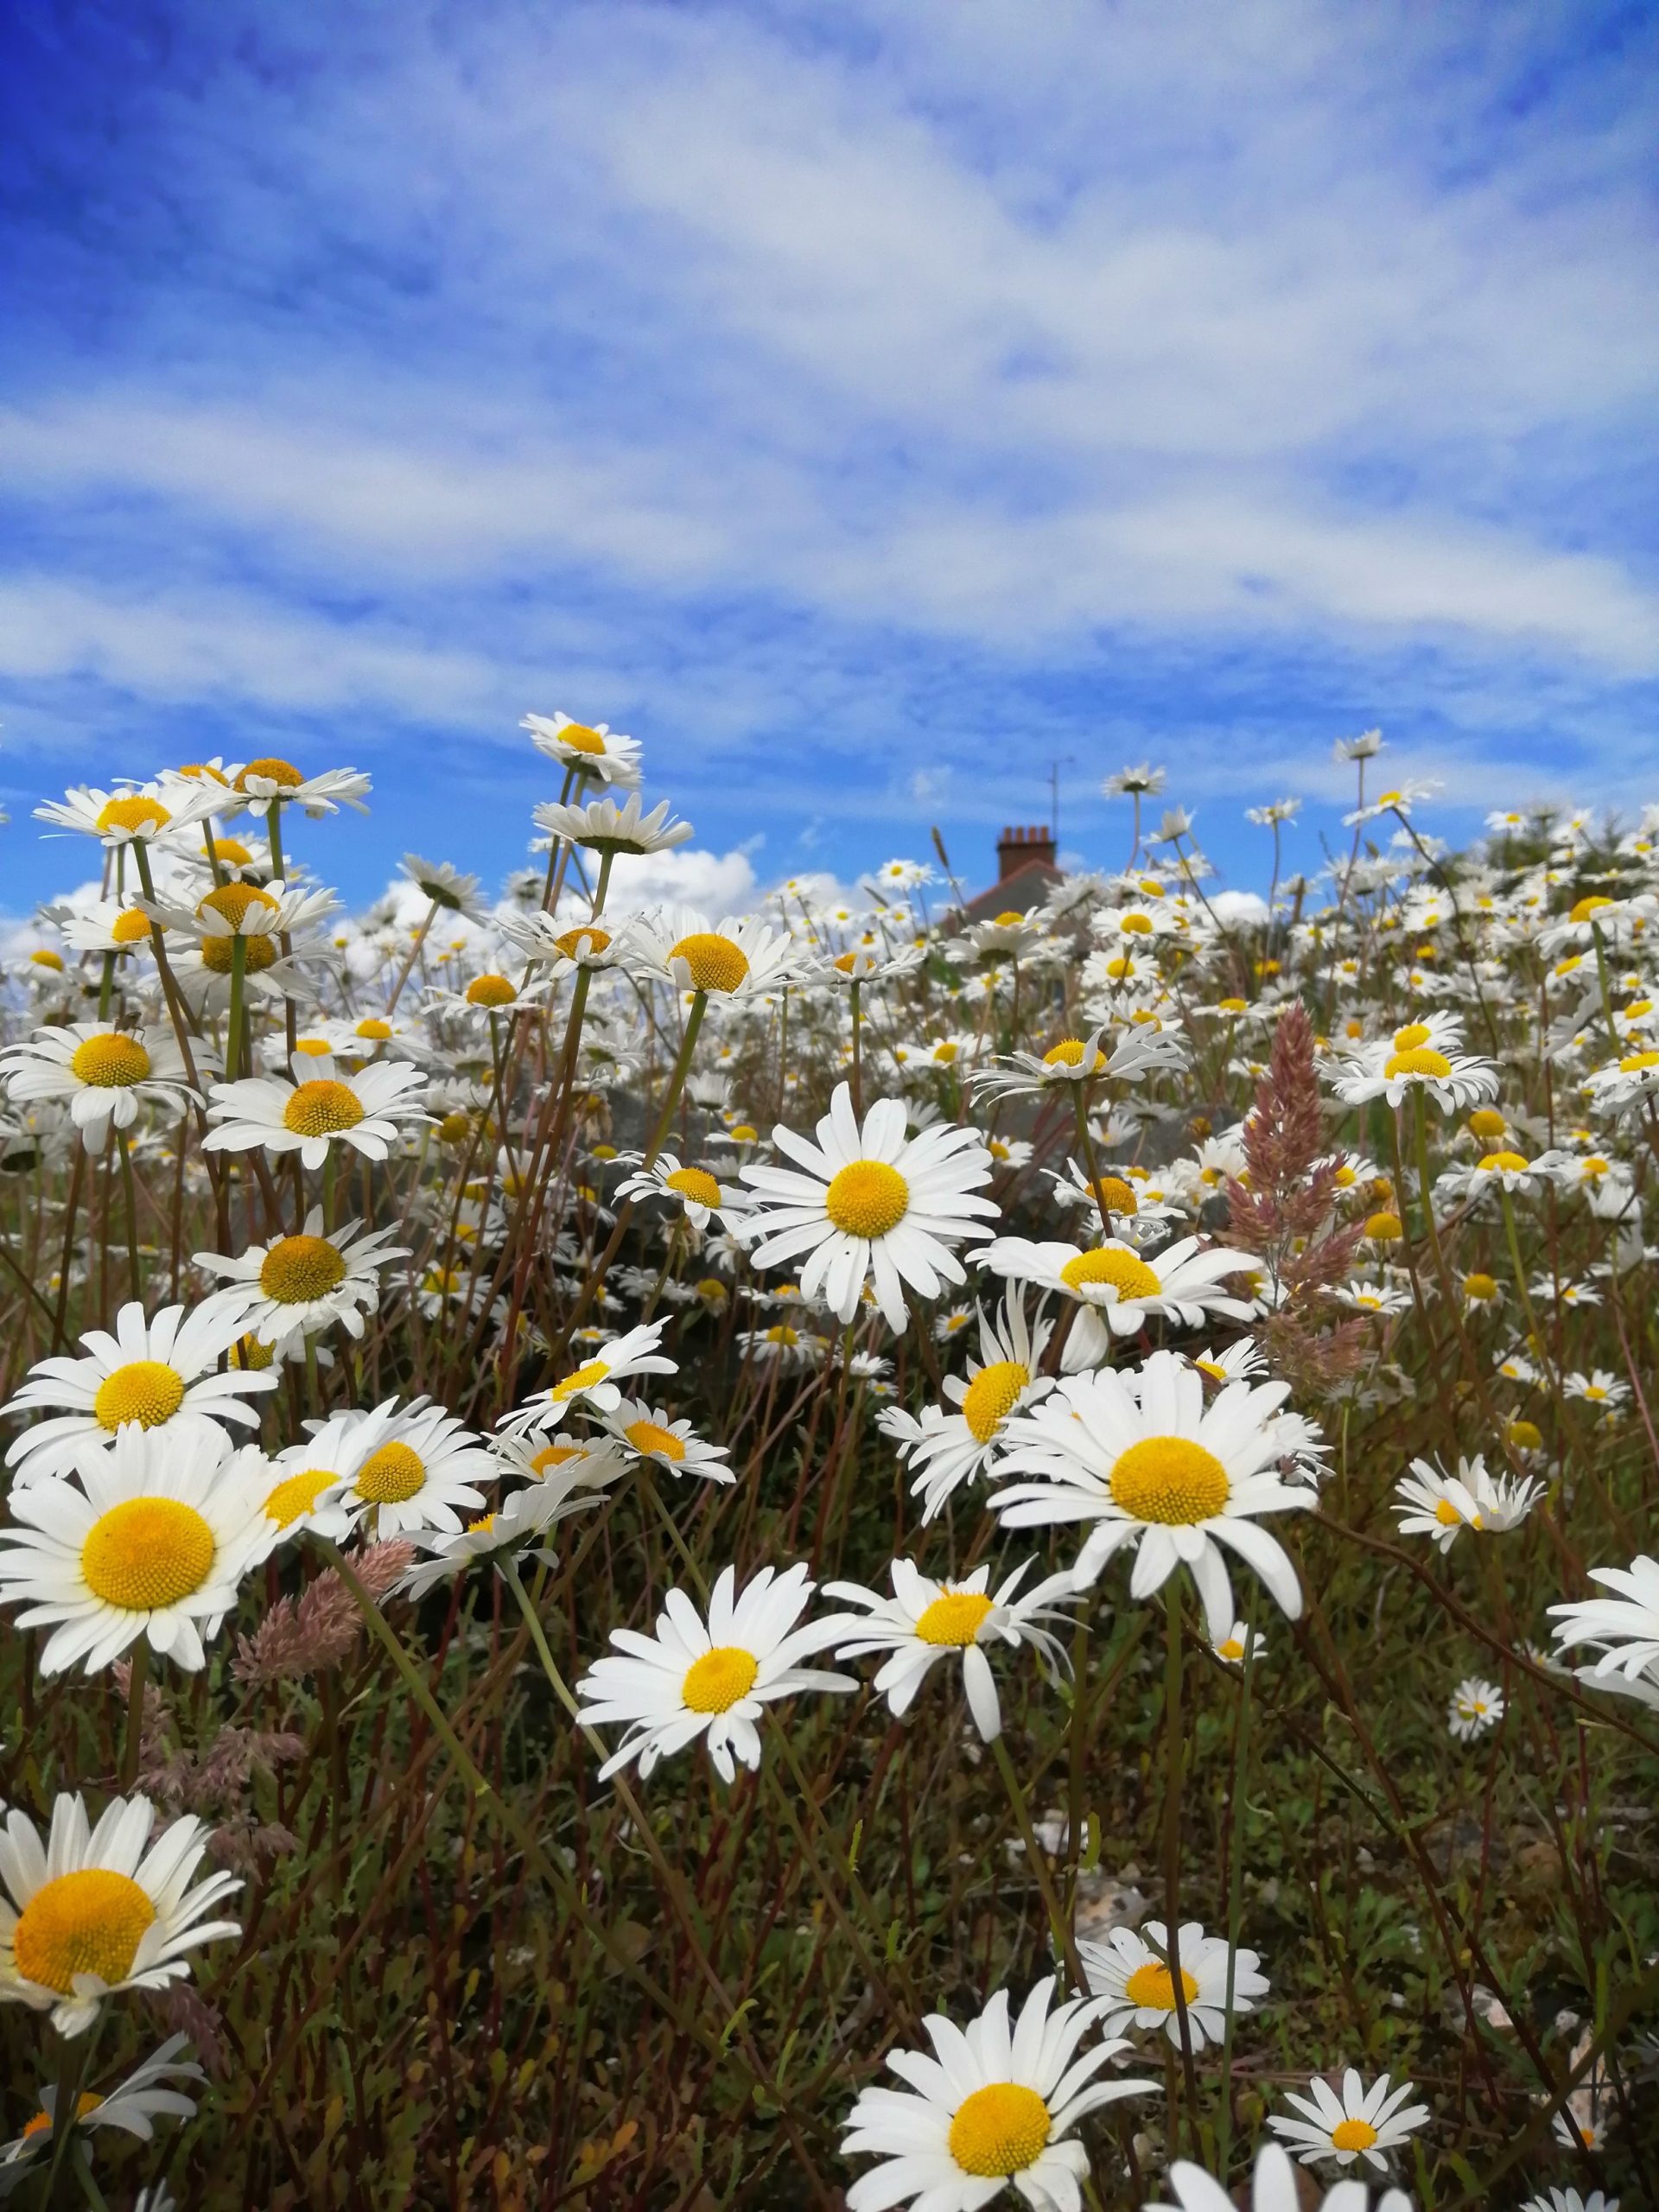 A photograph of a field of Daisies; each with a yellow centre and white petals. Overhead, the sky is a deep blue and is strewn with wispy white clouds.